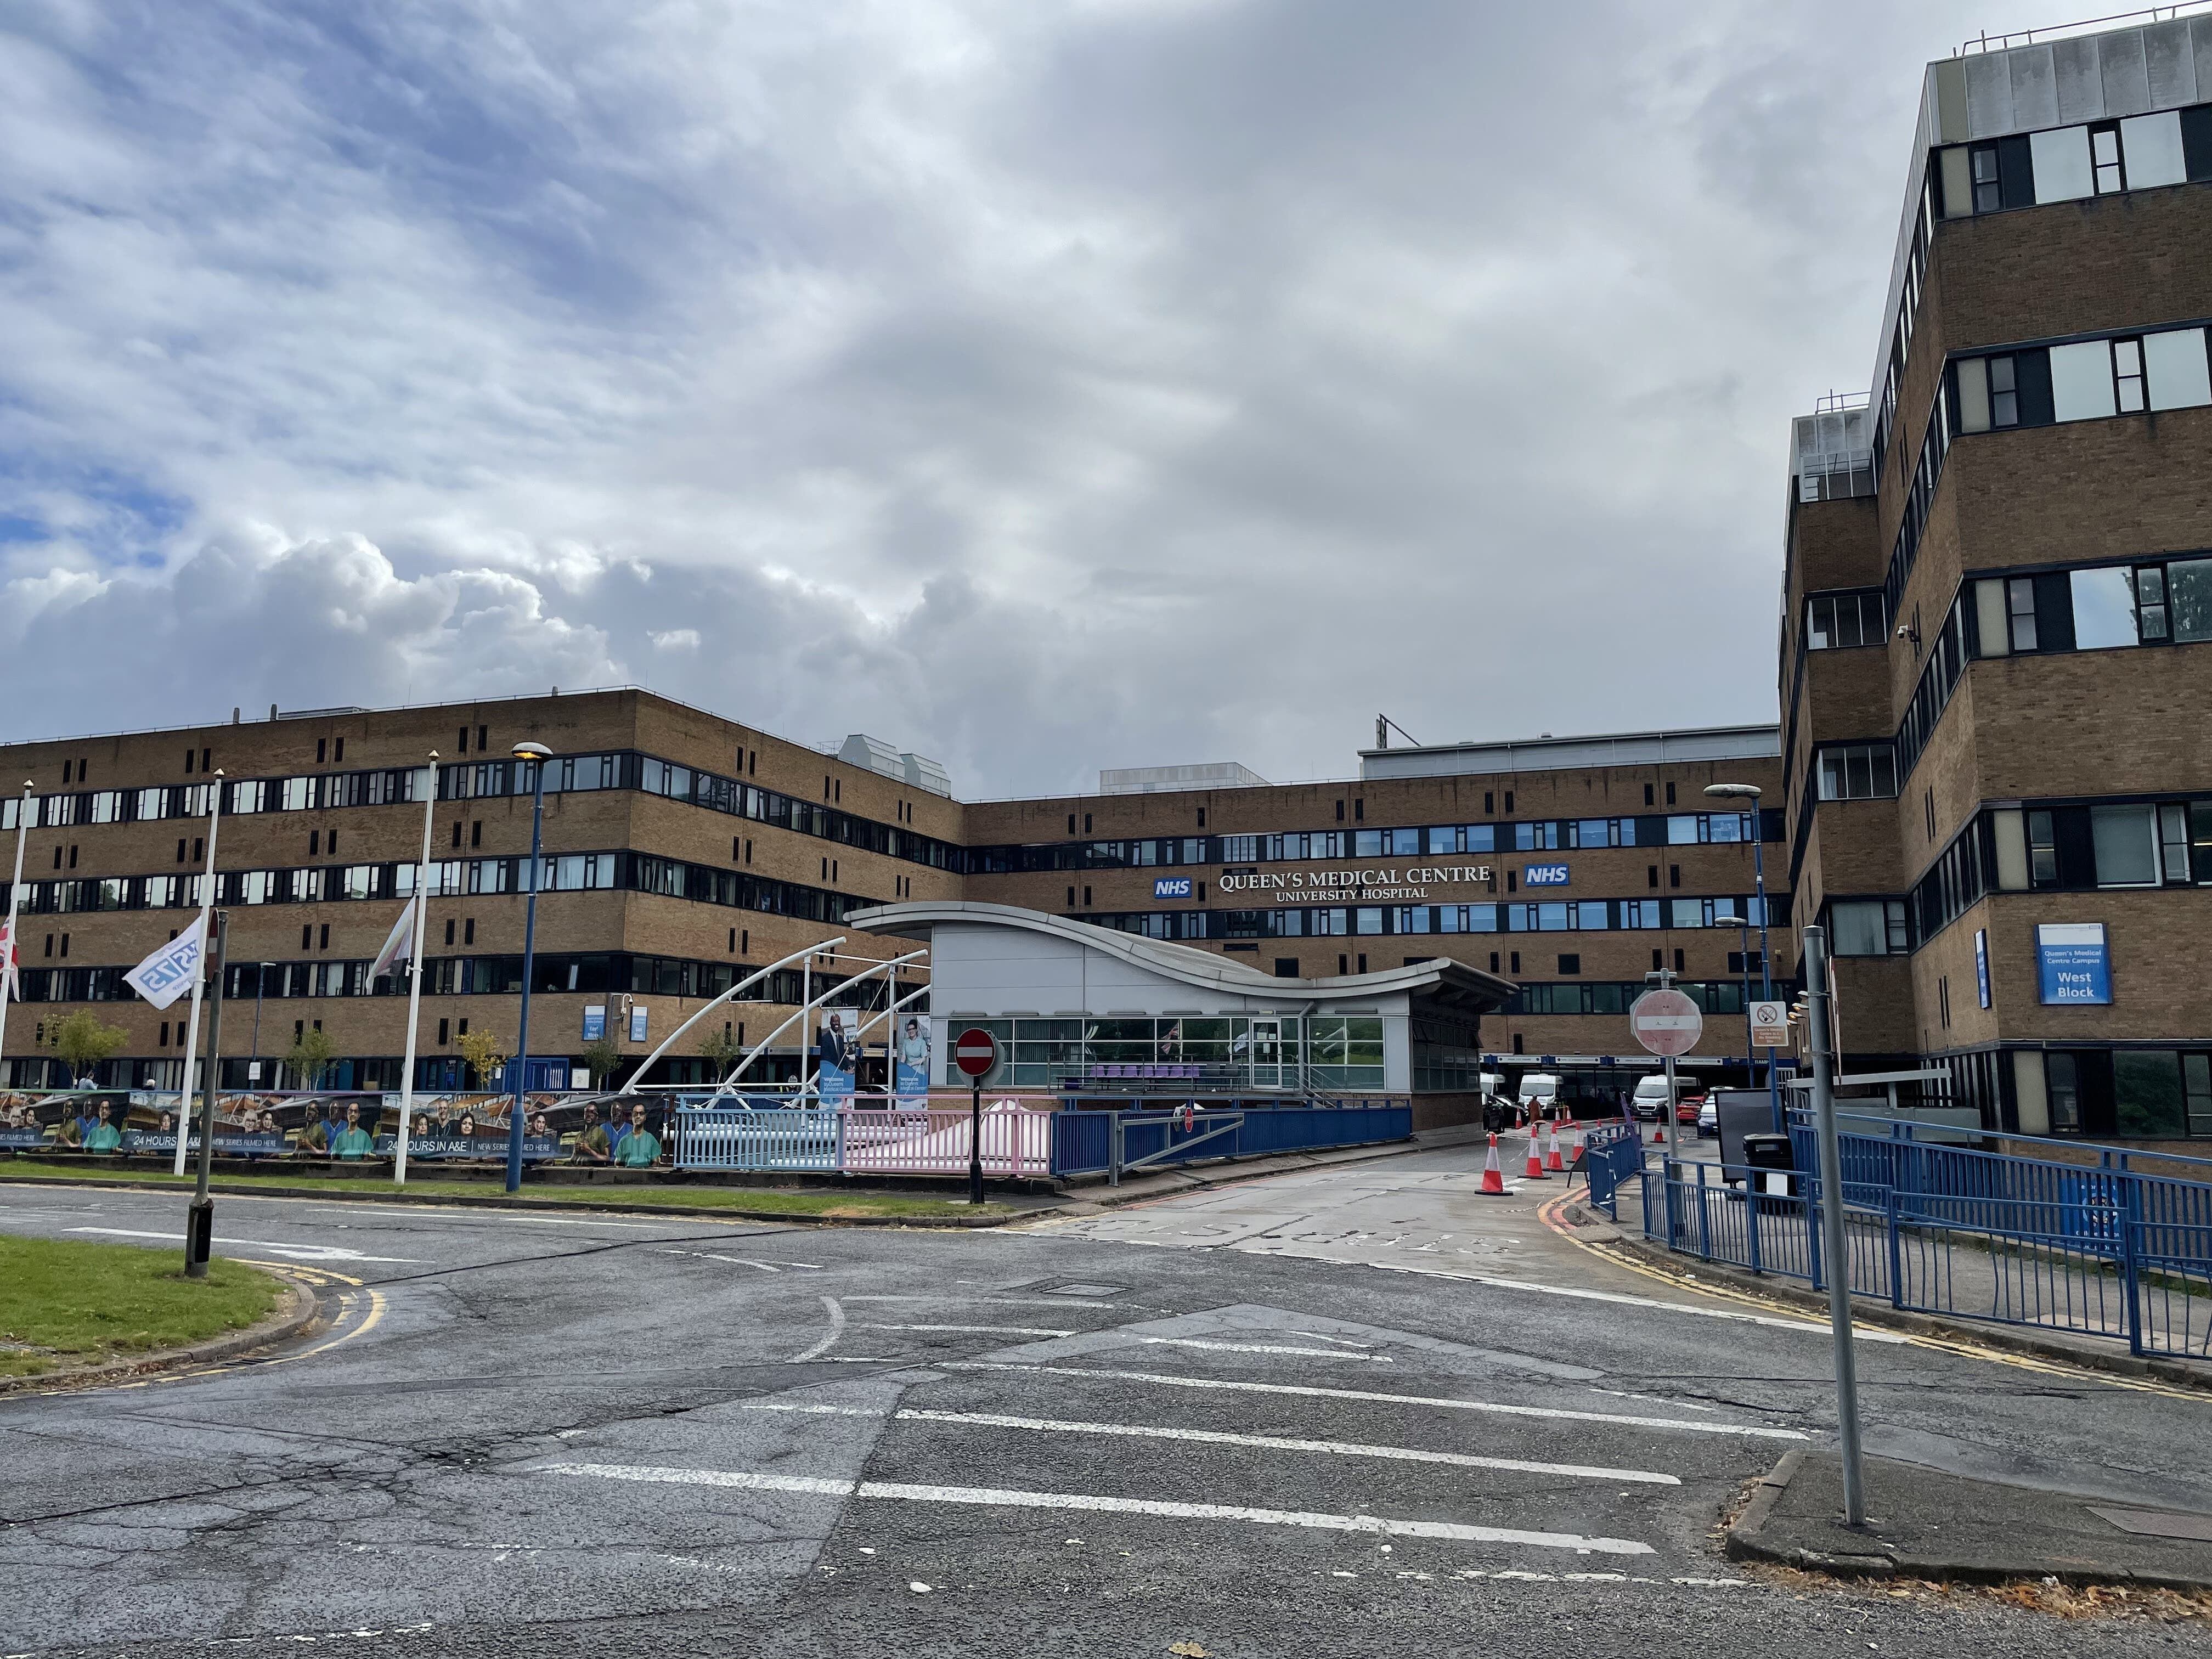 Progress in Nottingham maternity services ‘stalled’, inquiry chairwoman fears